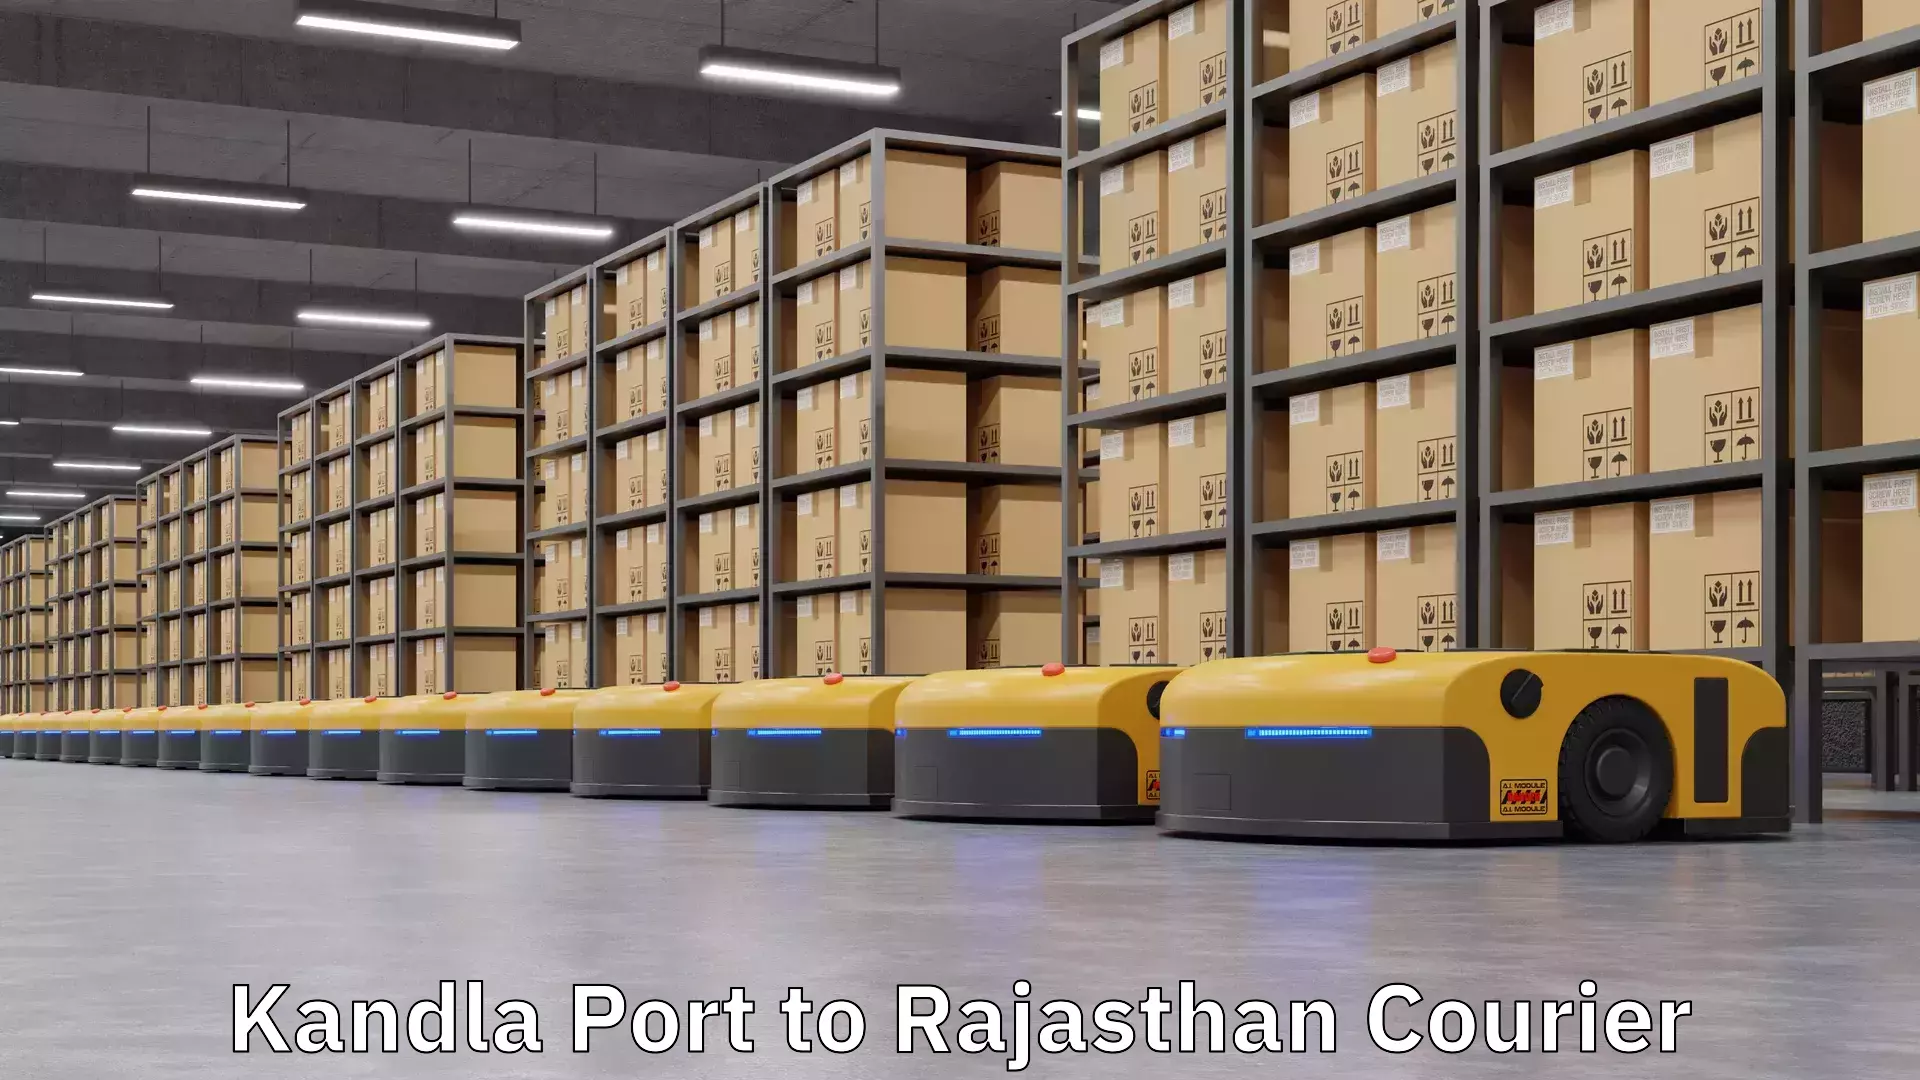 Express delivery solutions Kandla Port to Rajasthan